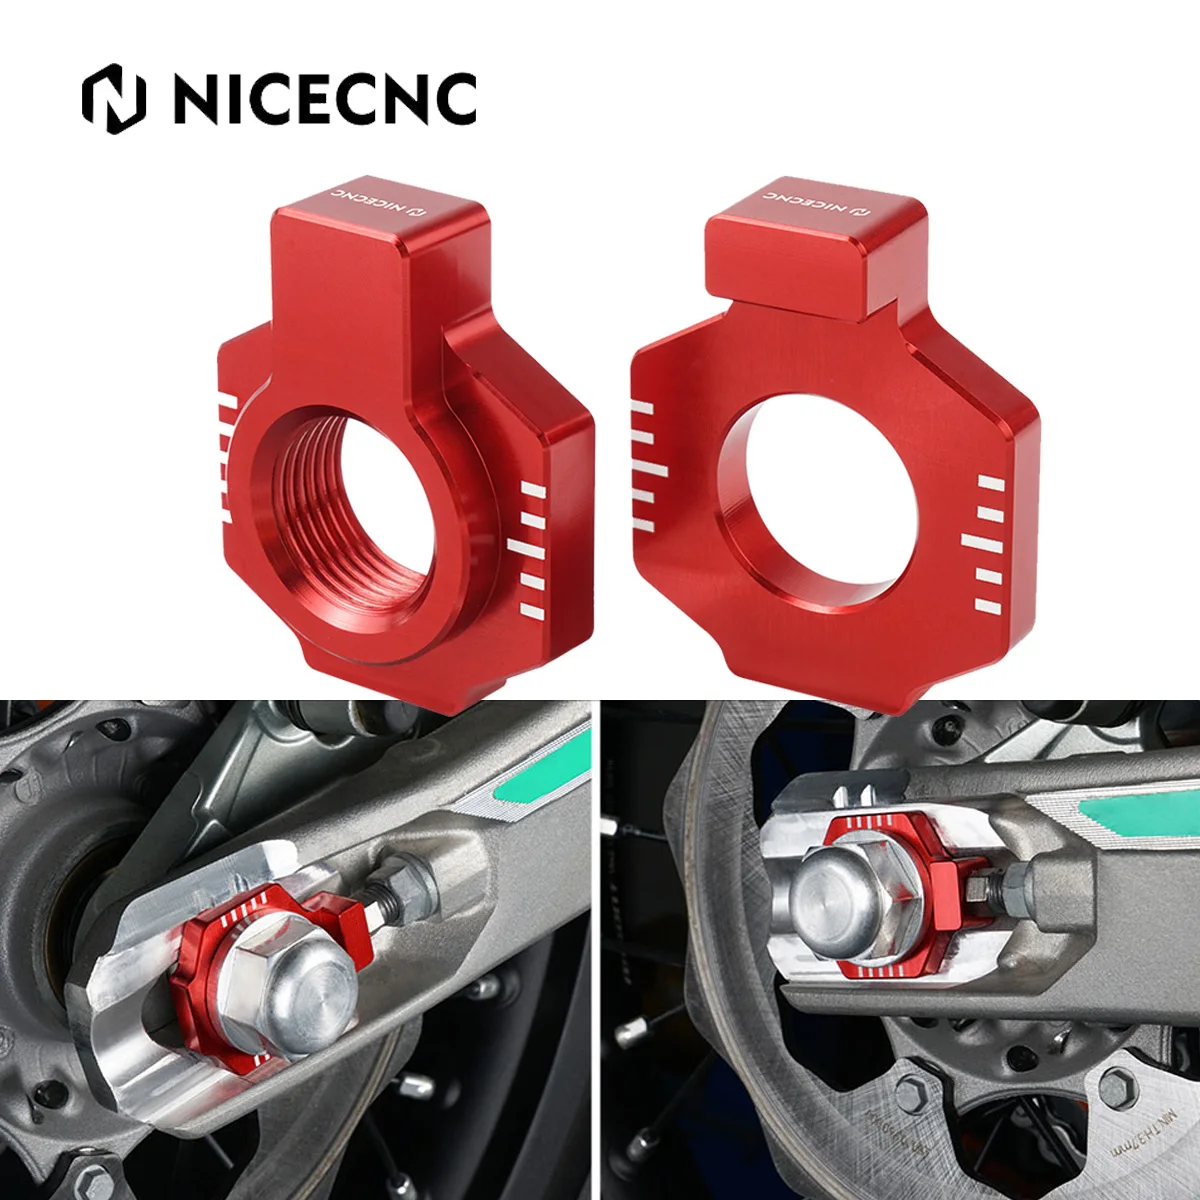 

NiceCNC Chain Adjuster Rear Axle Block for Beta RR RRS RS 125 250 300 350 390 430 450 480 498 500 520 Enduro Racing Xtrainer 300